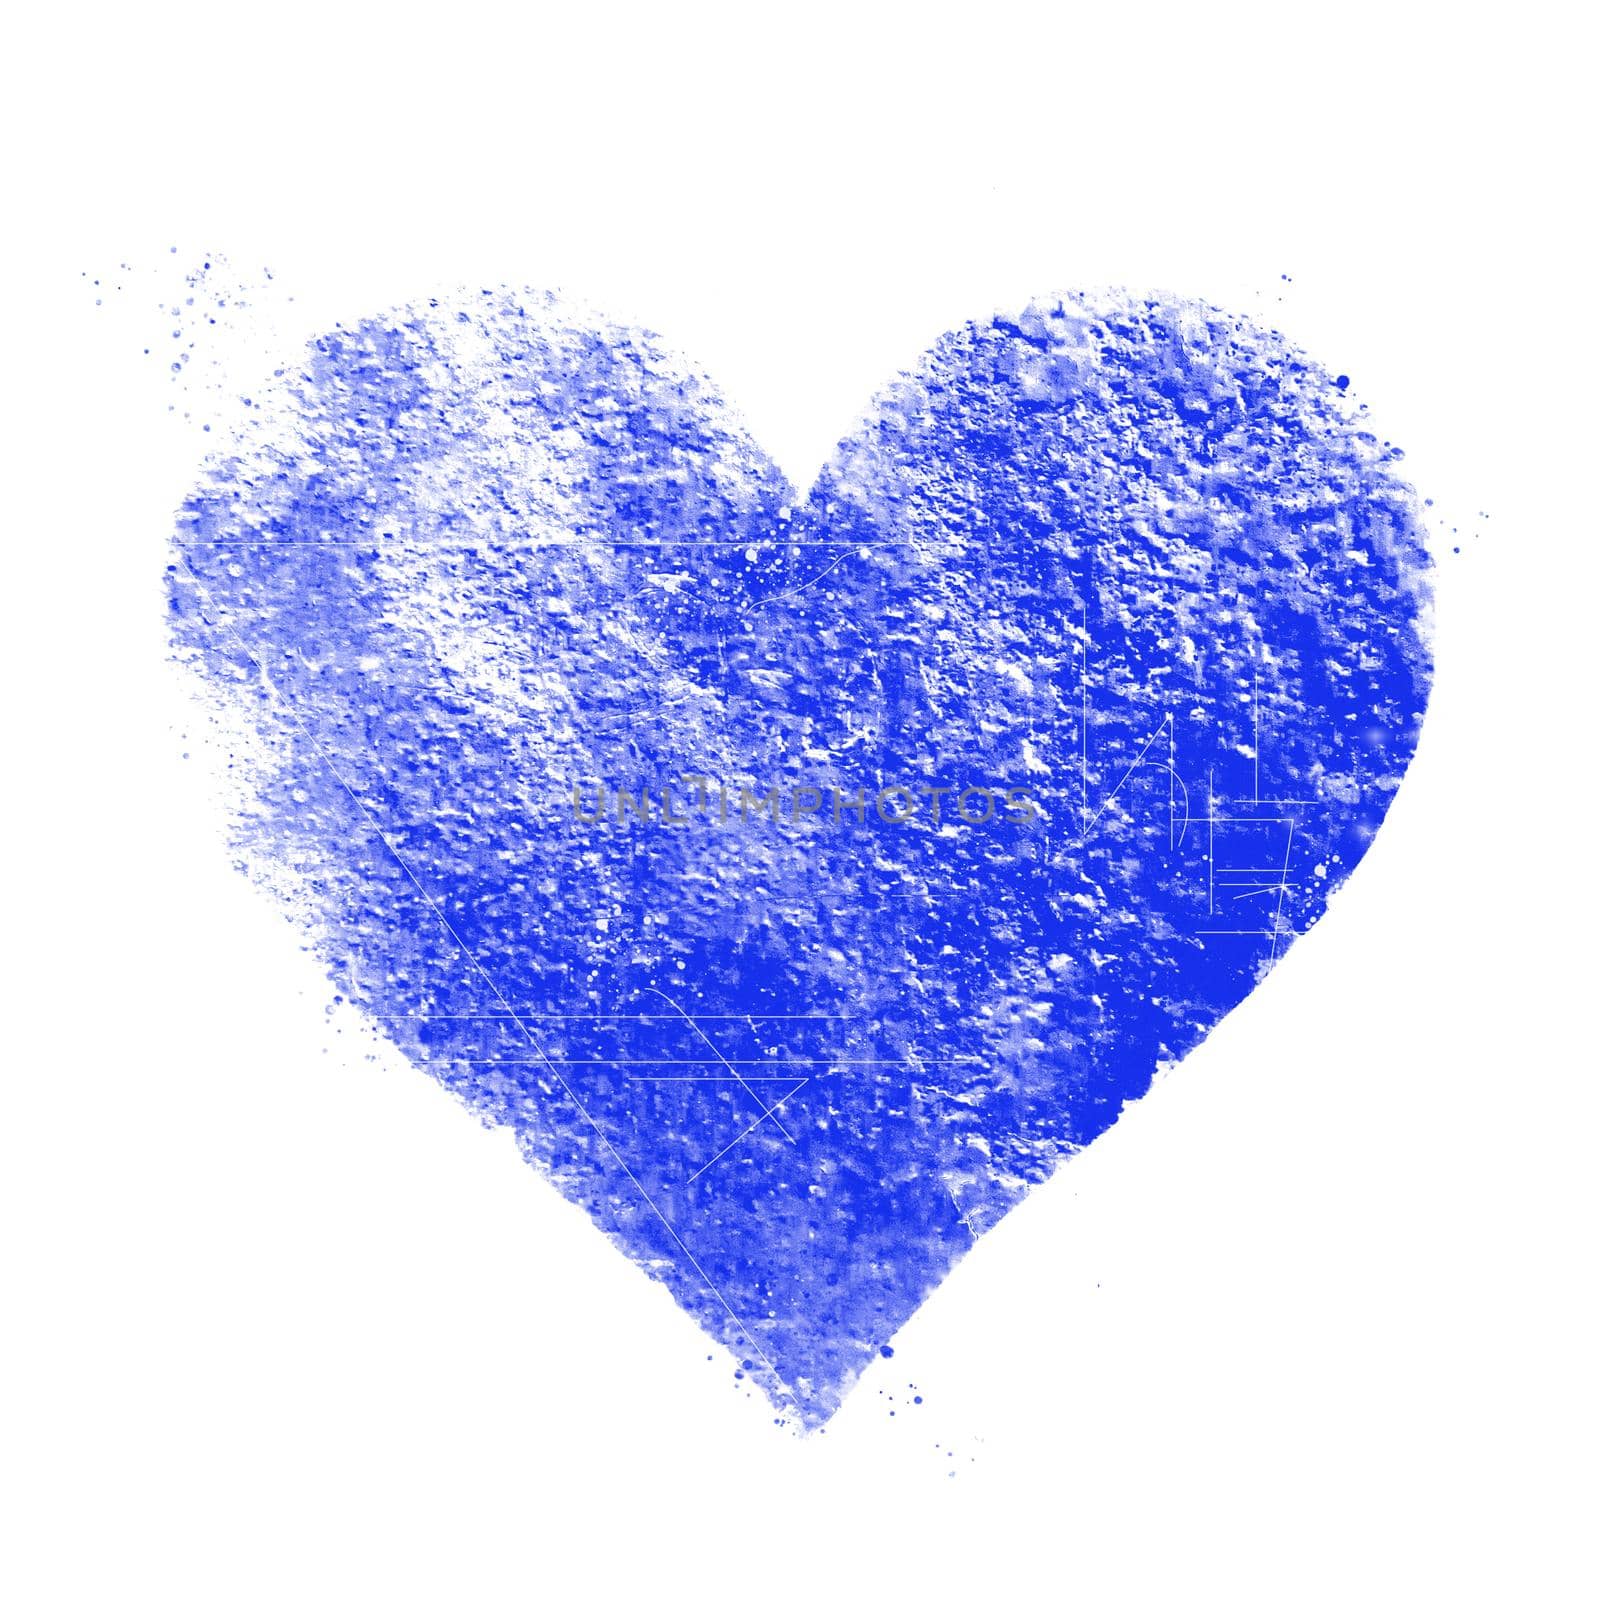 Vintage blue heart. Great for Valentine's Day, wedding, scrapbook, grunge surface textures.
Scratched heart